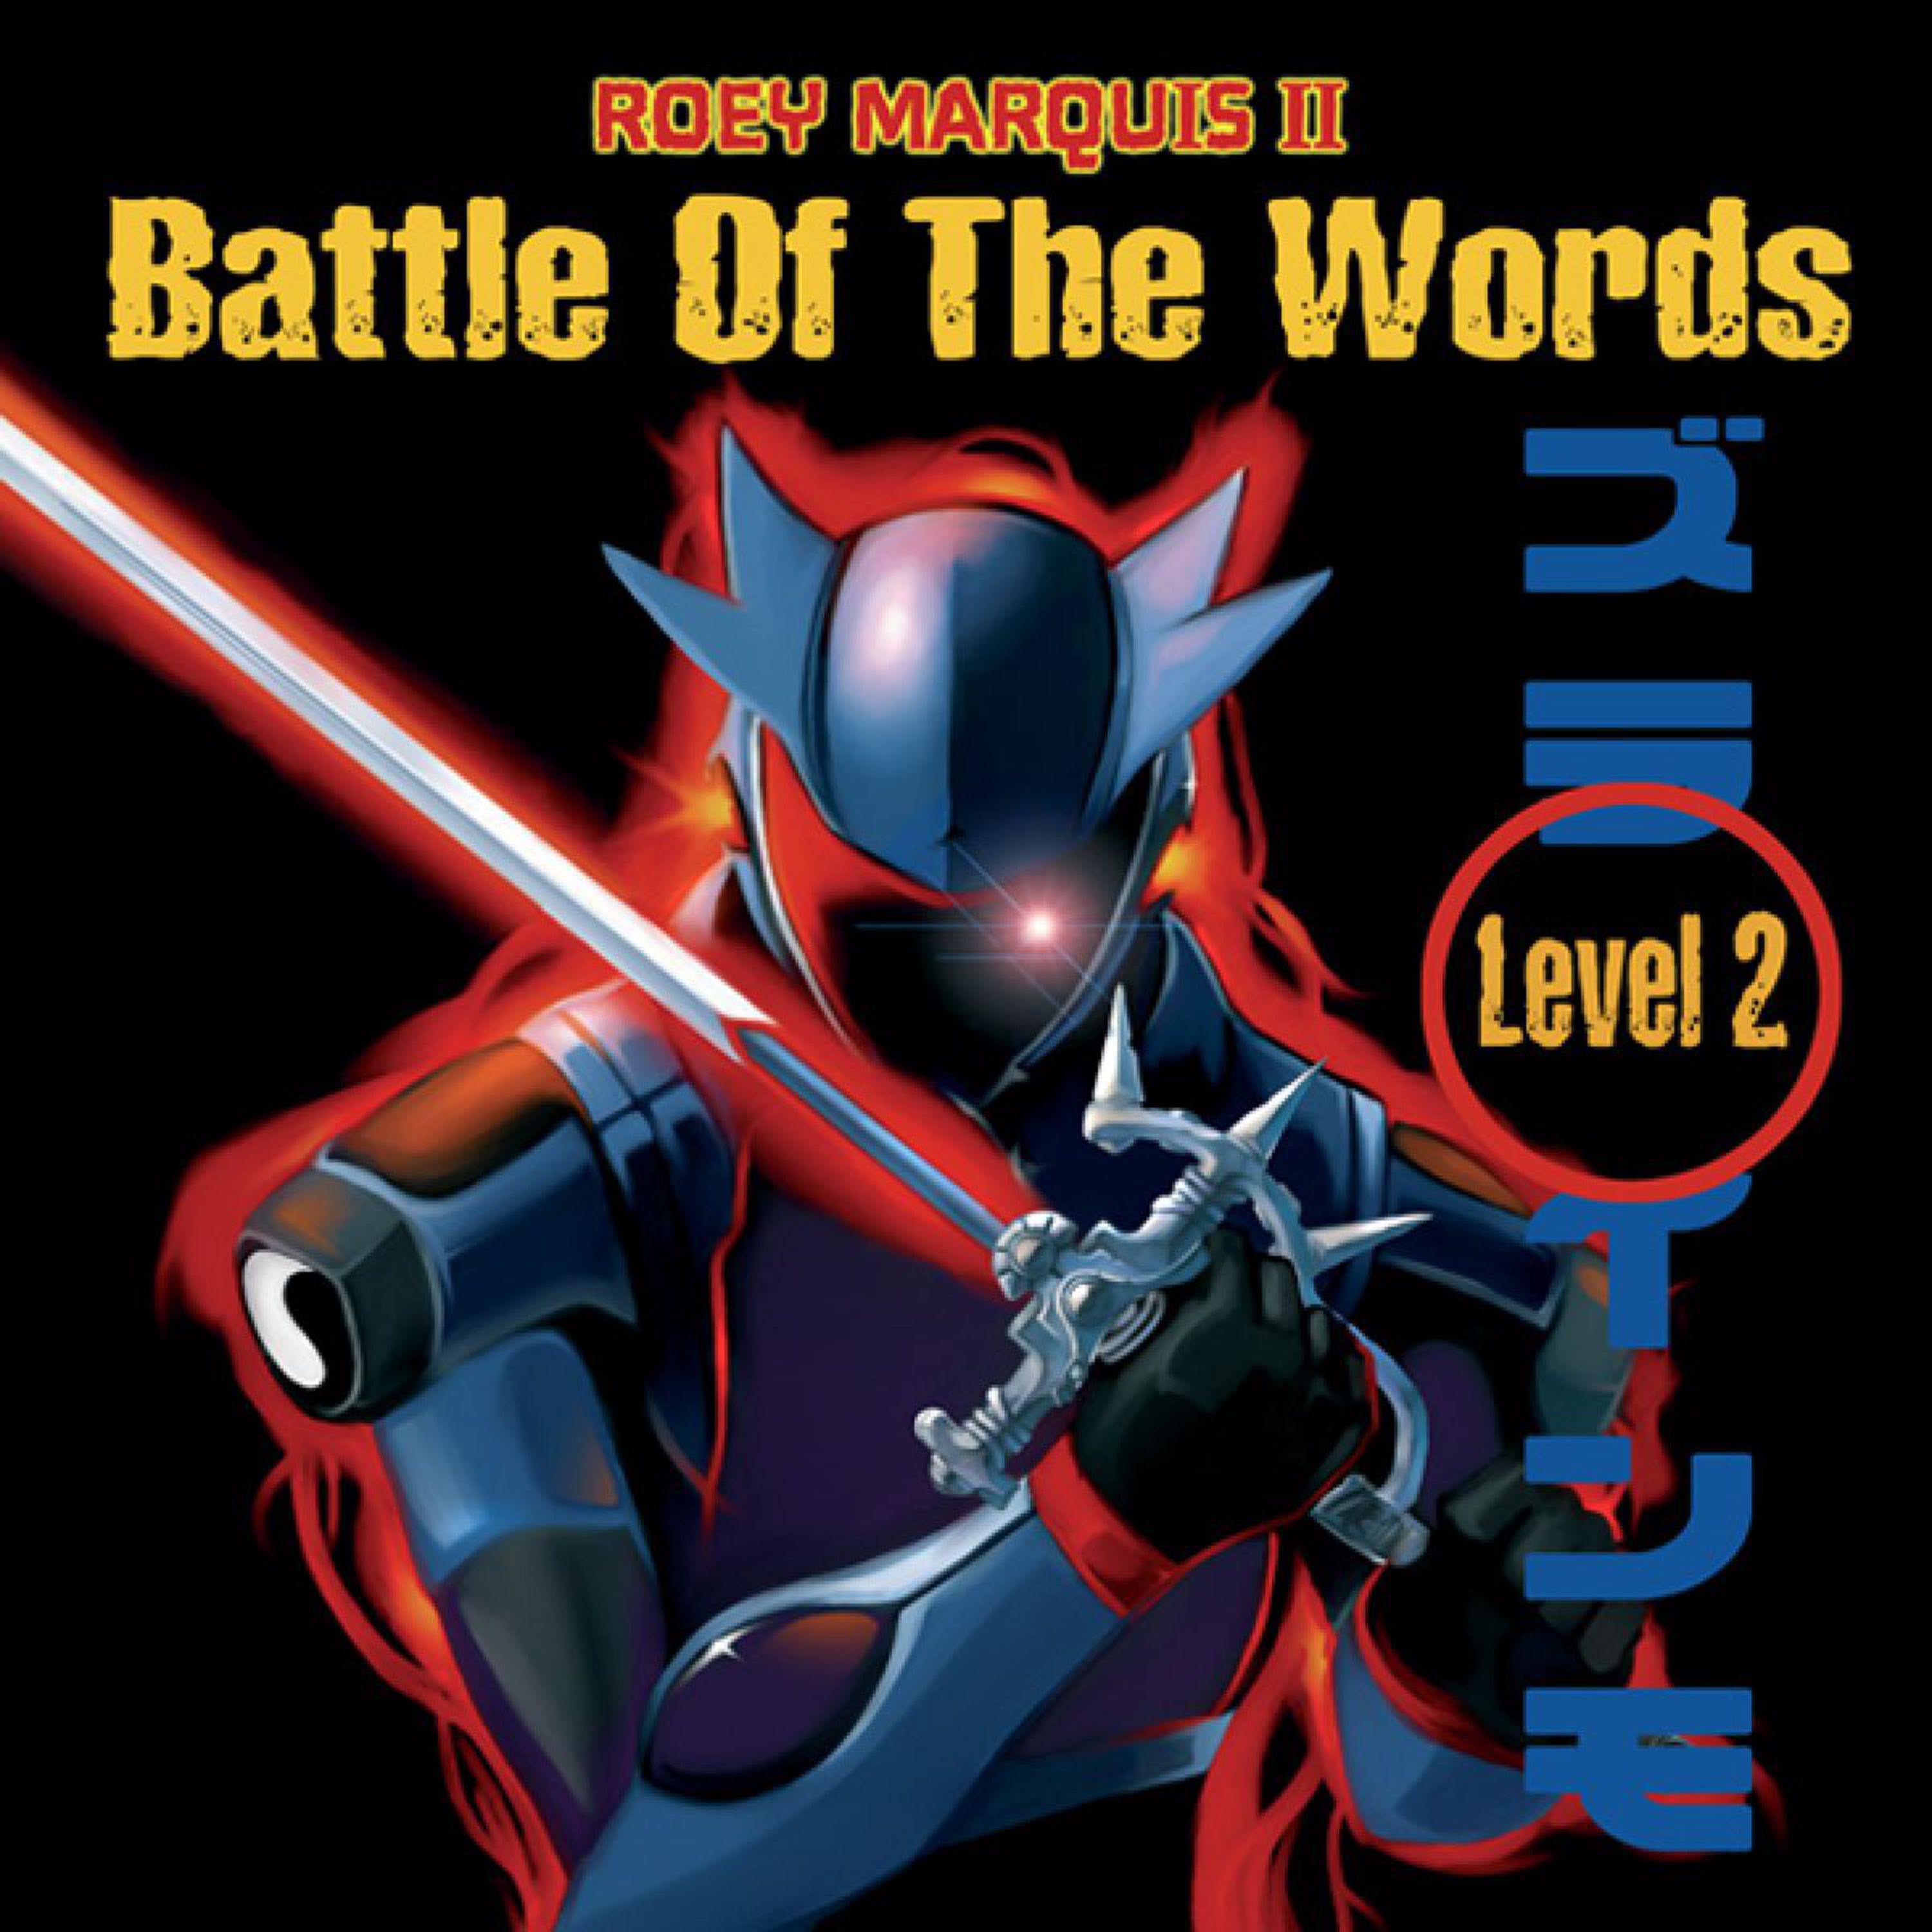 Battle of the Words Level 2